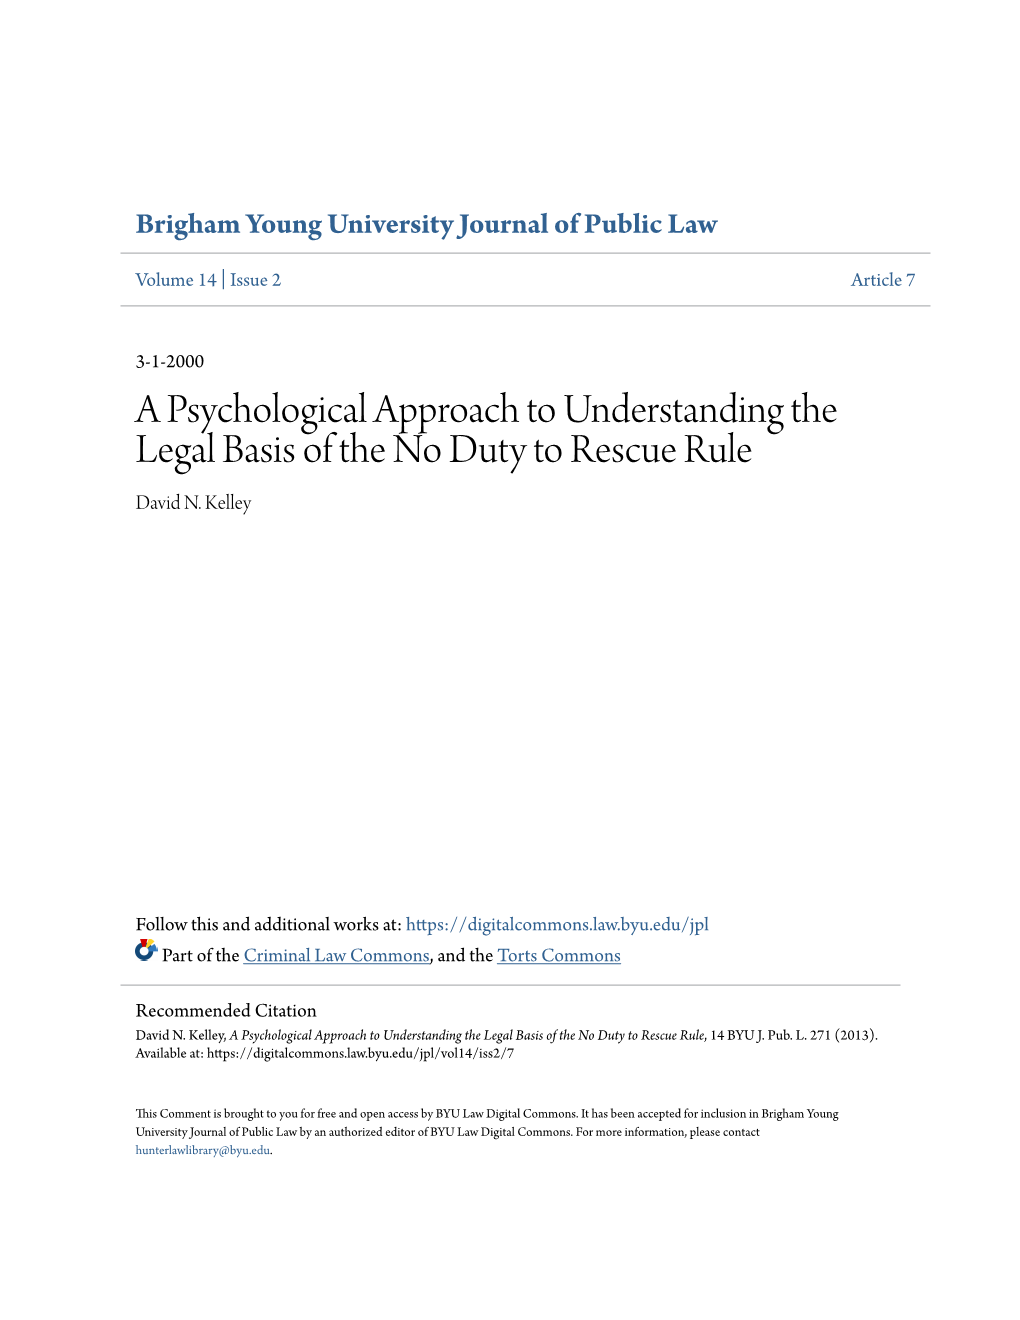 A Psychological Approach to Understanding the Legal Basis of the No Duty to Rescue Rule David N